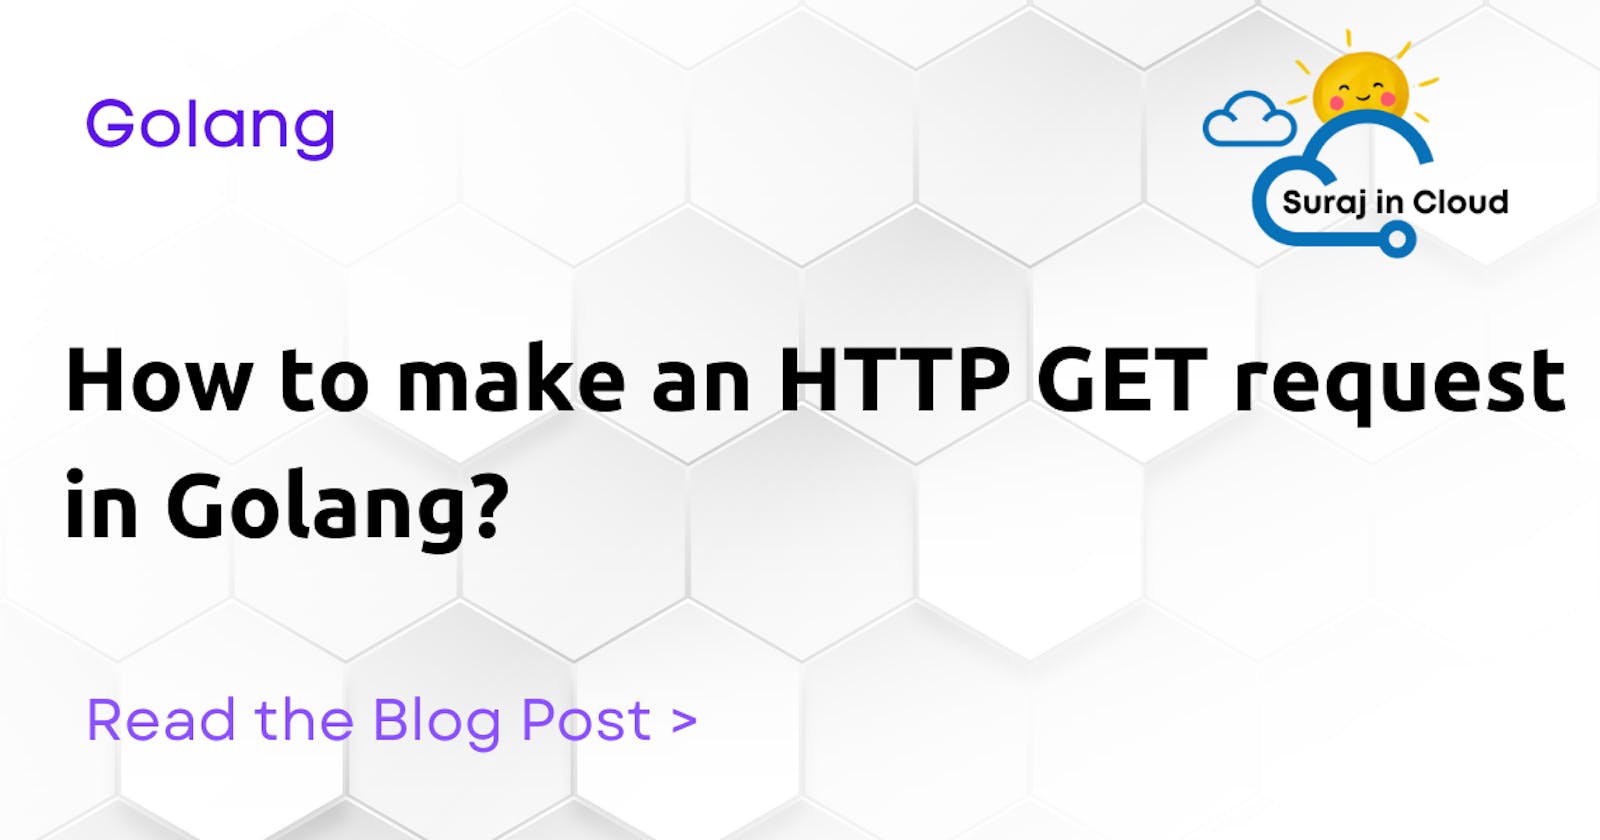 How to make an HTTP GET request in Golang?